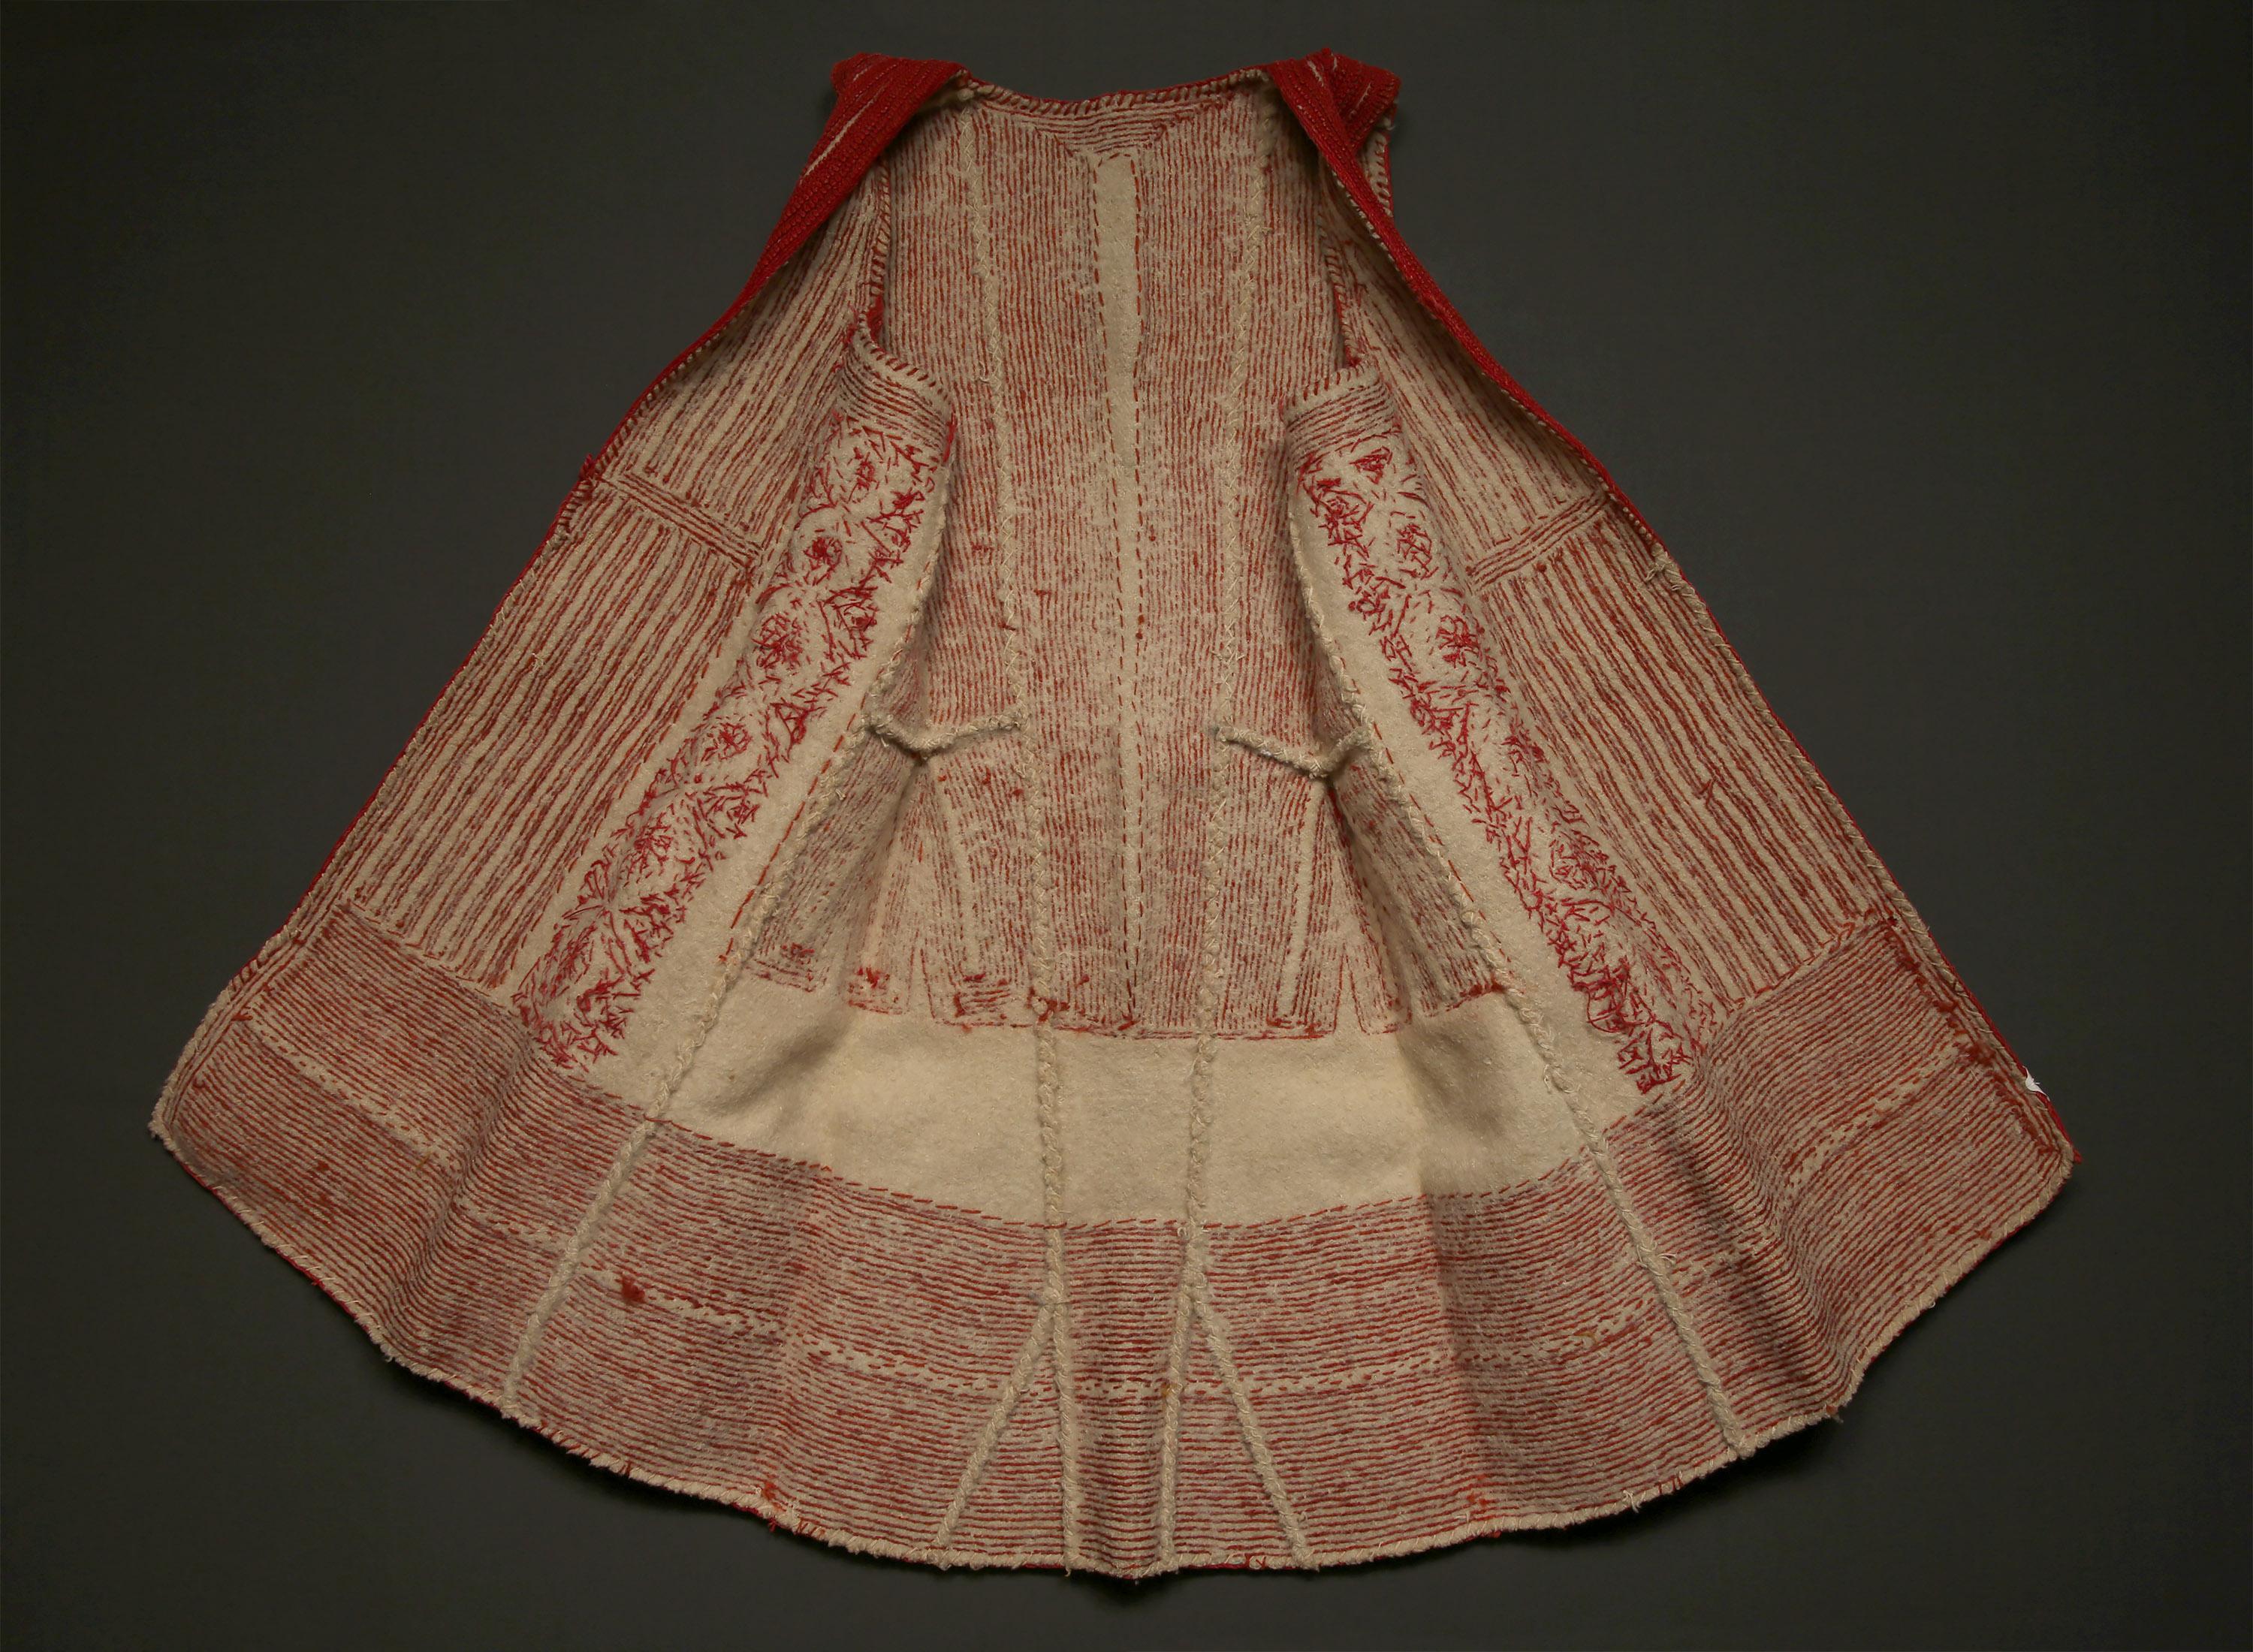 Late 19th century woman's waist coat, Macedonia

A traditional young bride’s vest, fitted at shoulders with flare at hips. It creates a visual statement of intricate simplicity. Felted natural wool with embroidered thick red wool and natural